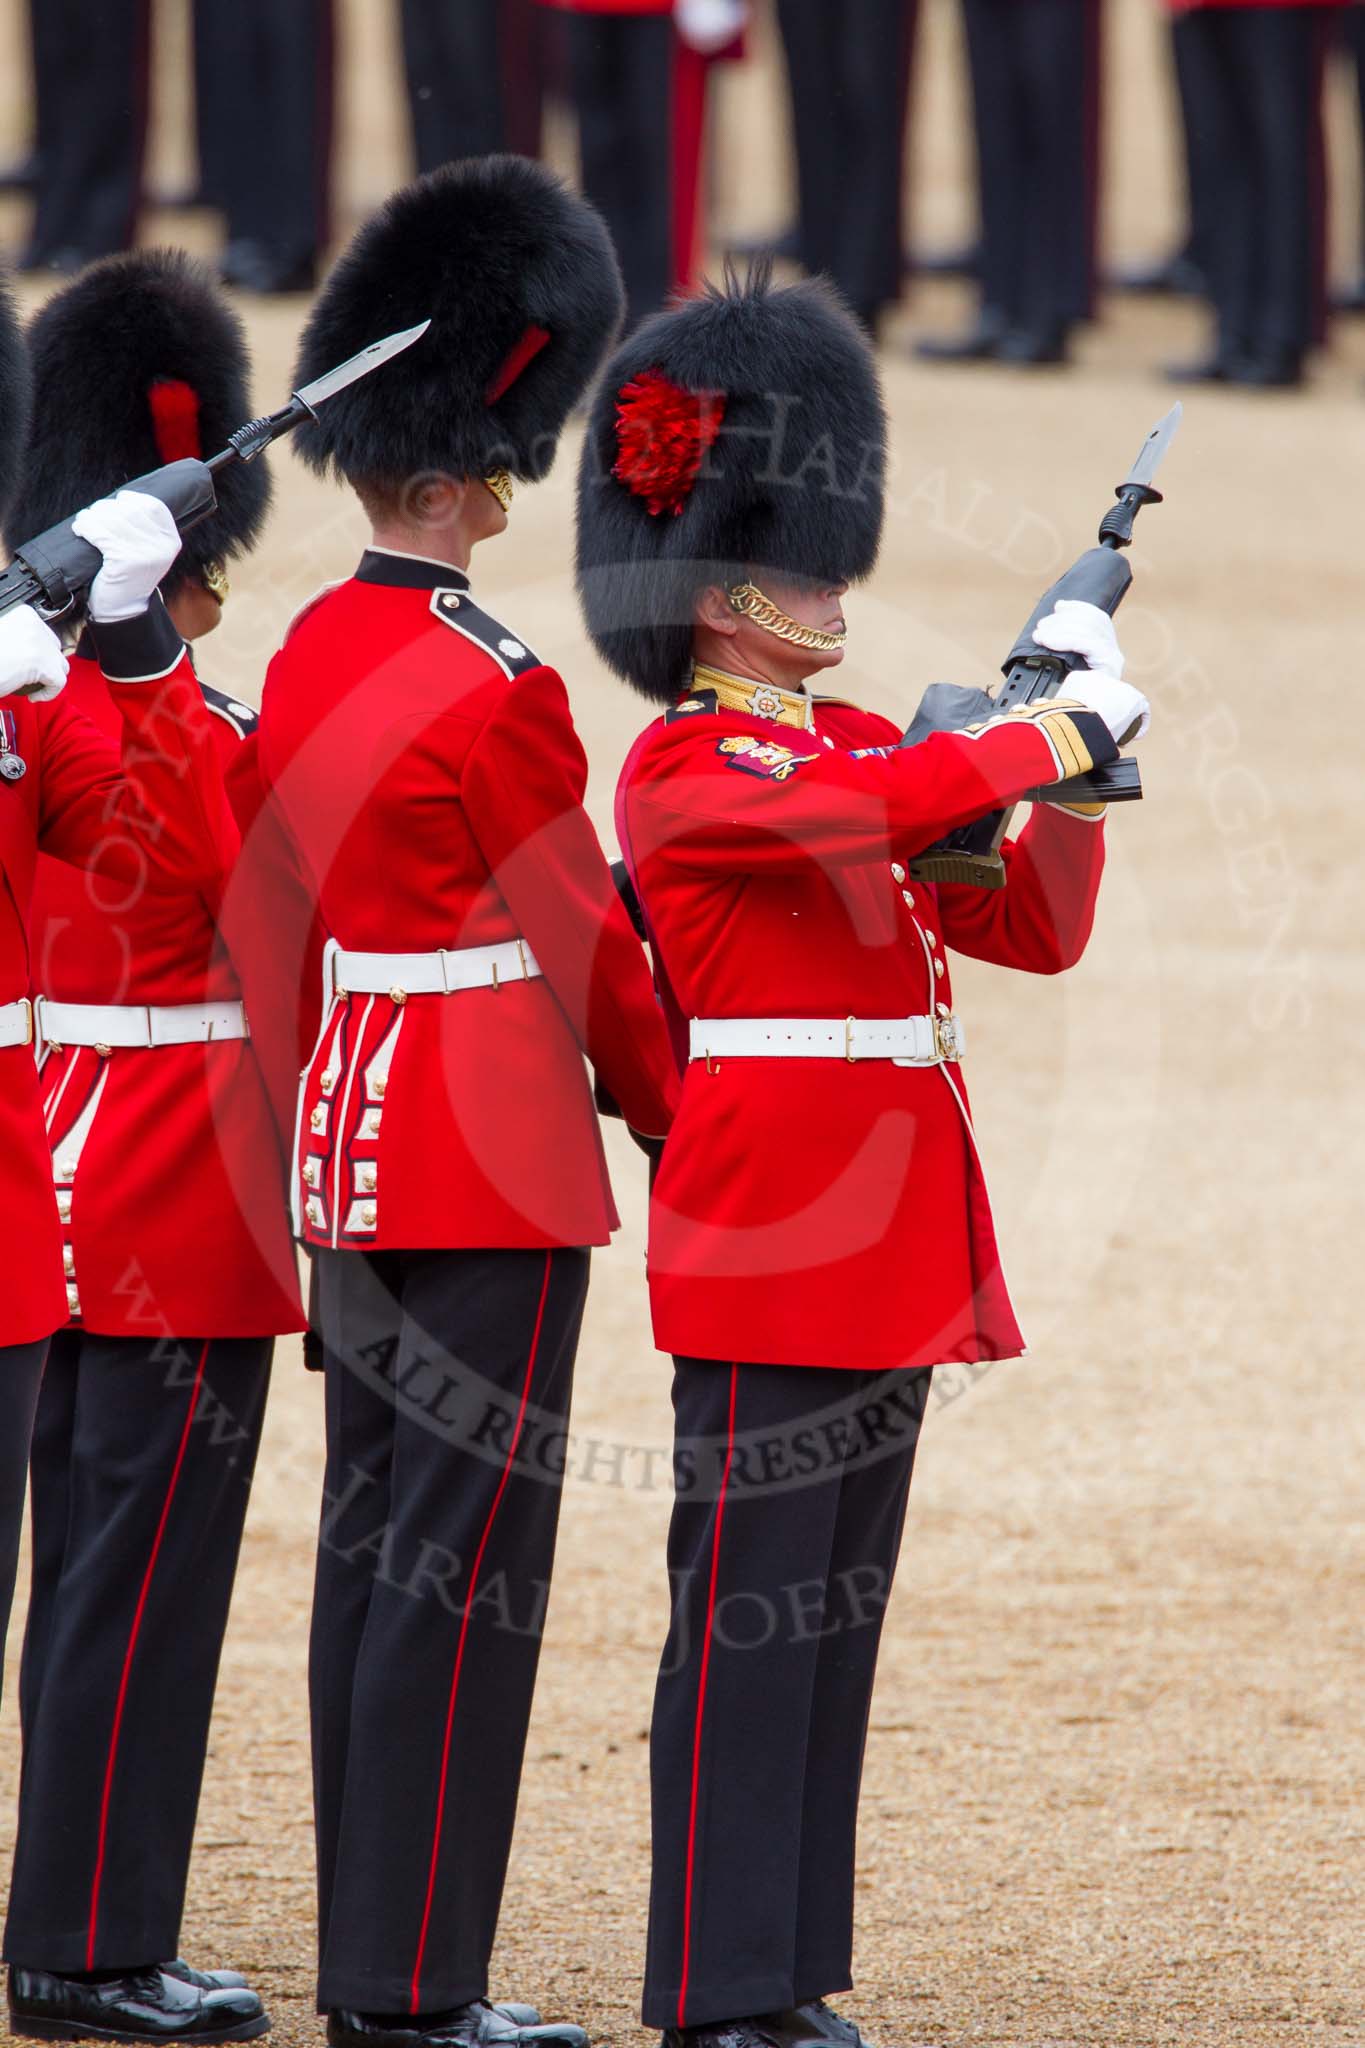 The Colonel's Review 2012: The Colour Sergeants of No. 1 Guard, now the Escort to the Colour, saluting..
Horse Guards Parade, Westminster,
London SW1,

United Kingdom,
on 09 June 2012 at 11:19, image #273